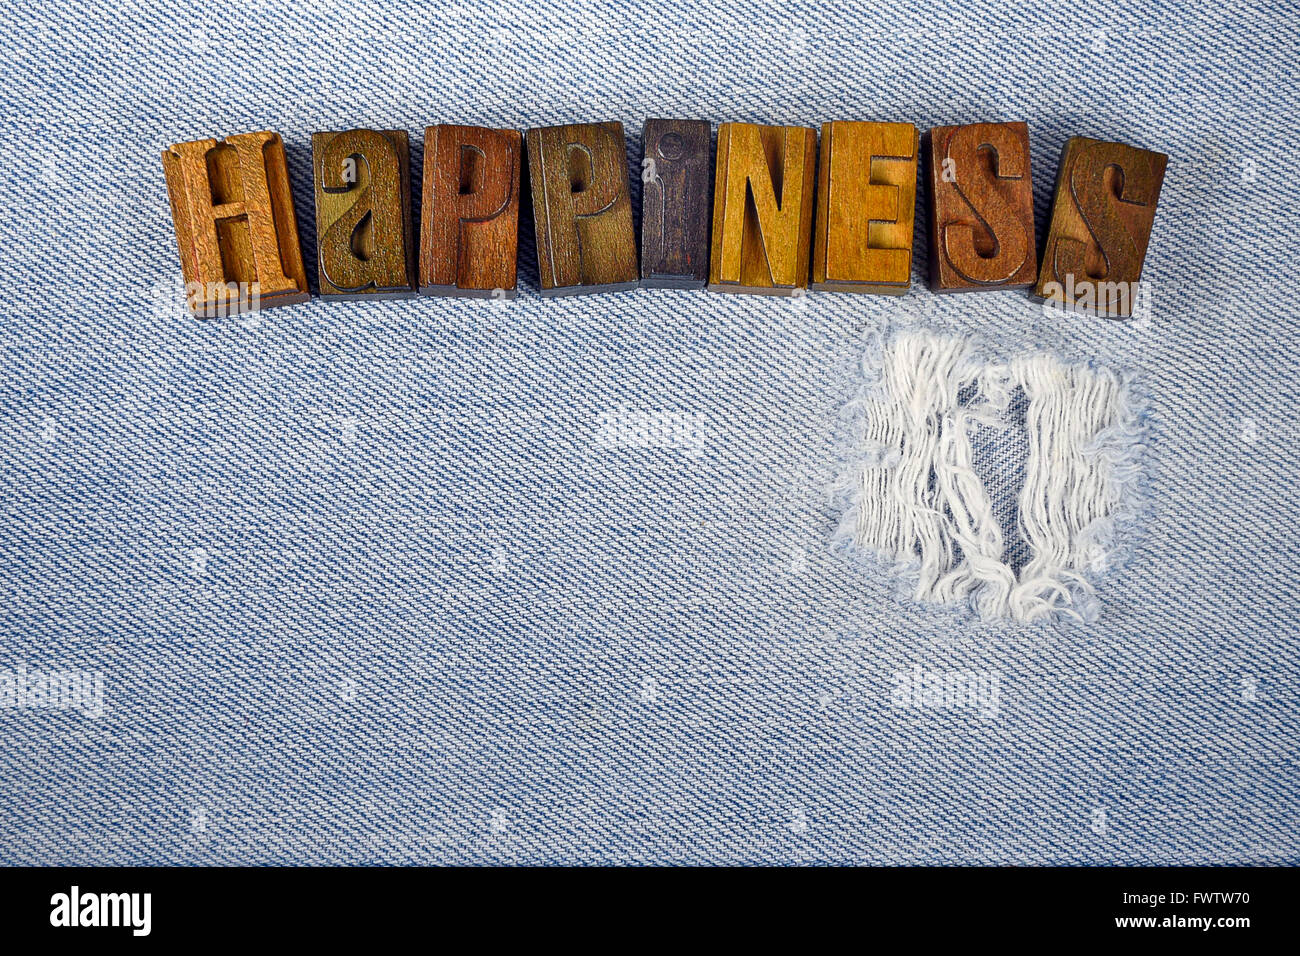 Word happiness in vintage letterpress type on frayed denim fabric. Stock Photo